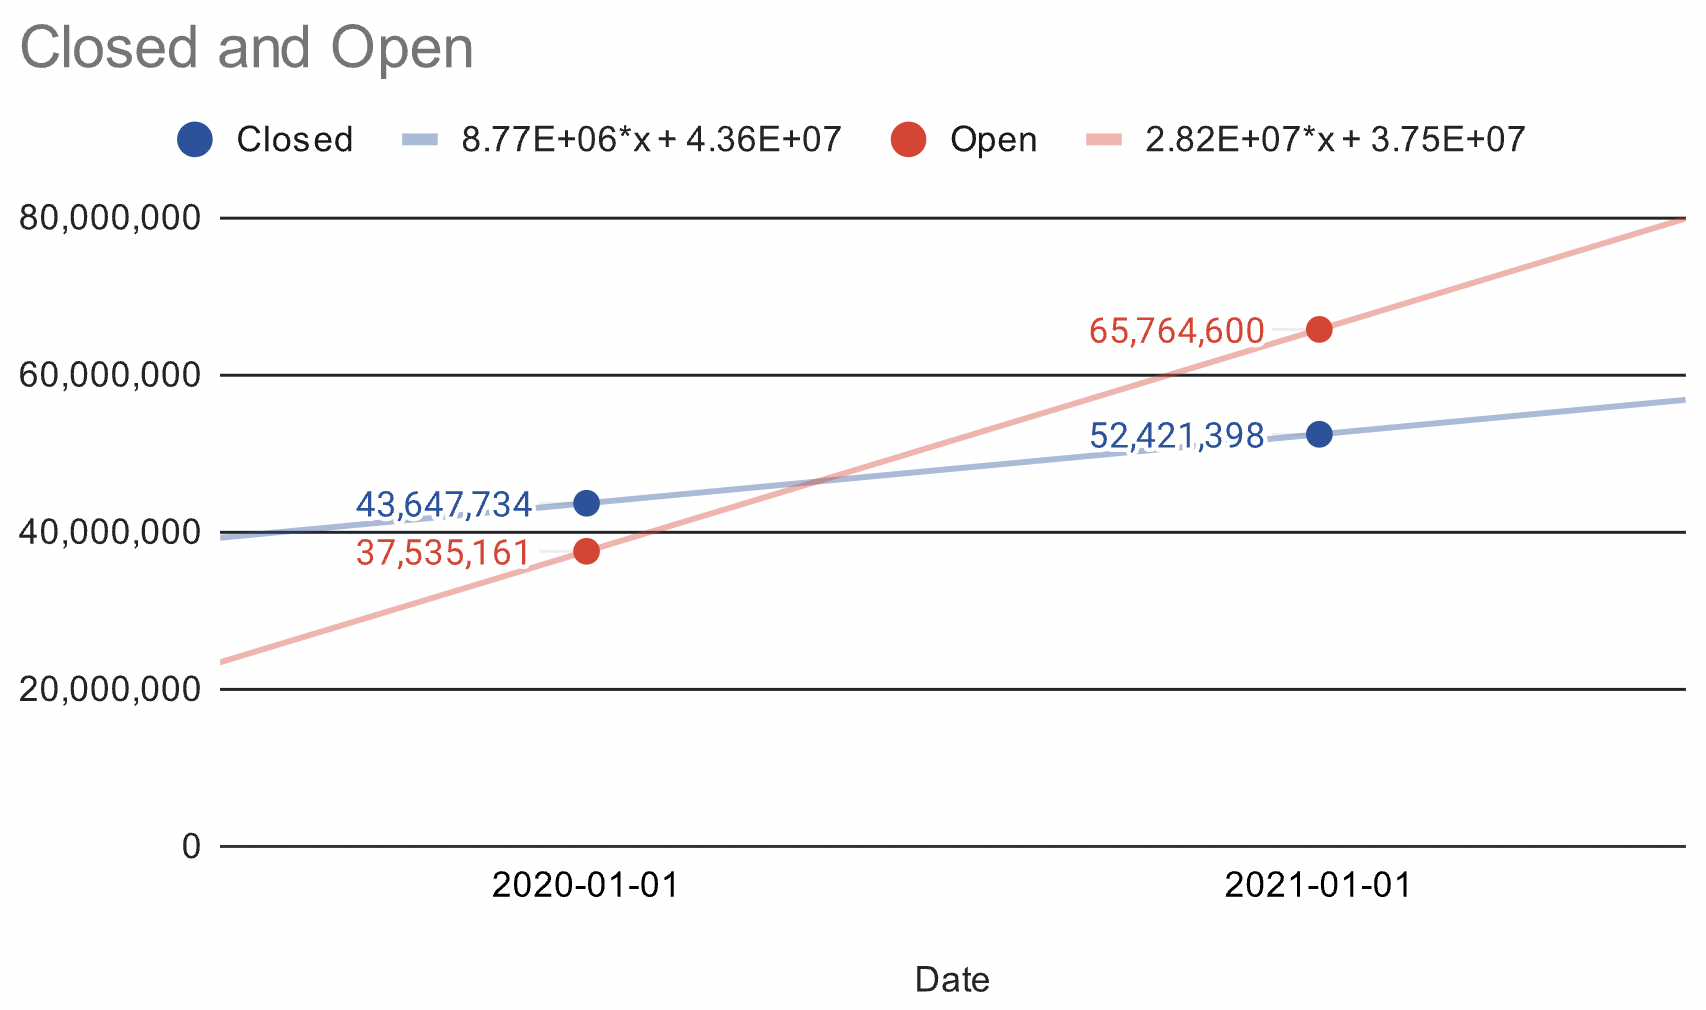 The steepness of closed issues is 20% year over year as opposed to the 75% increase seen with open issues 